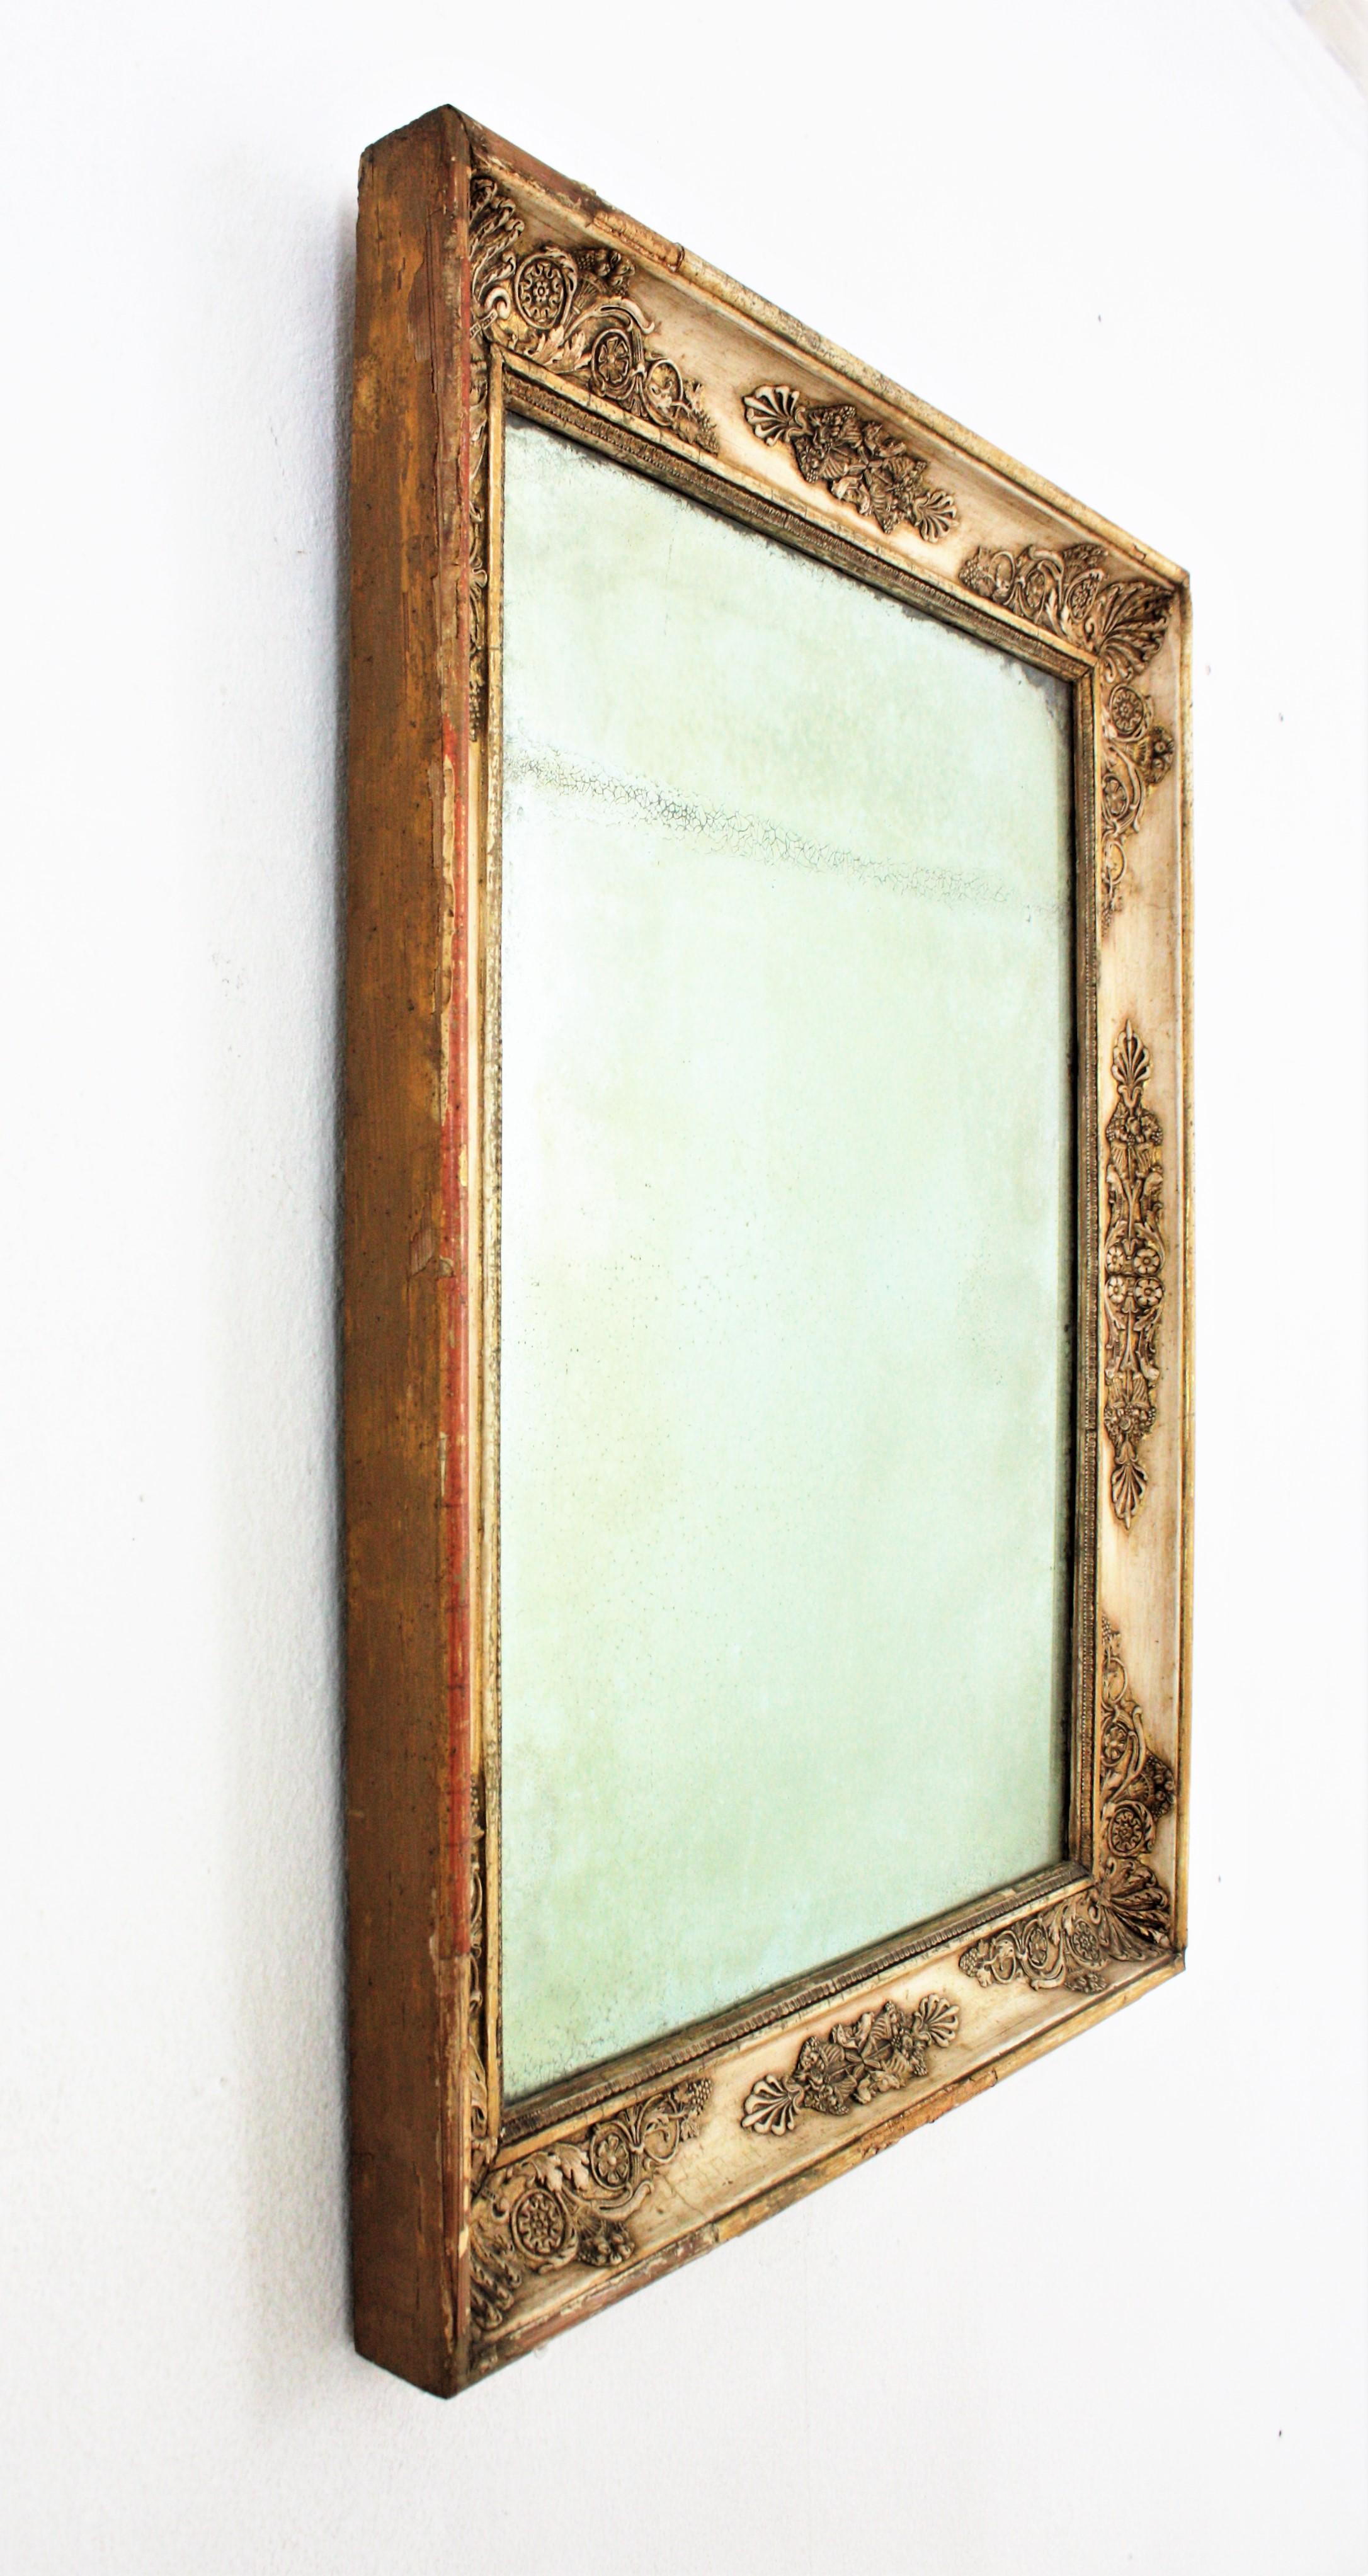 20th Century Empire Style Rectangular Mirror in Beige and Giltwood For Sale